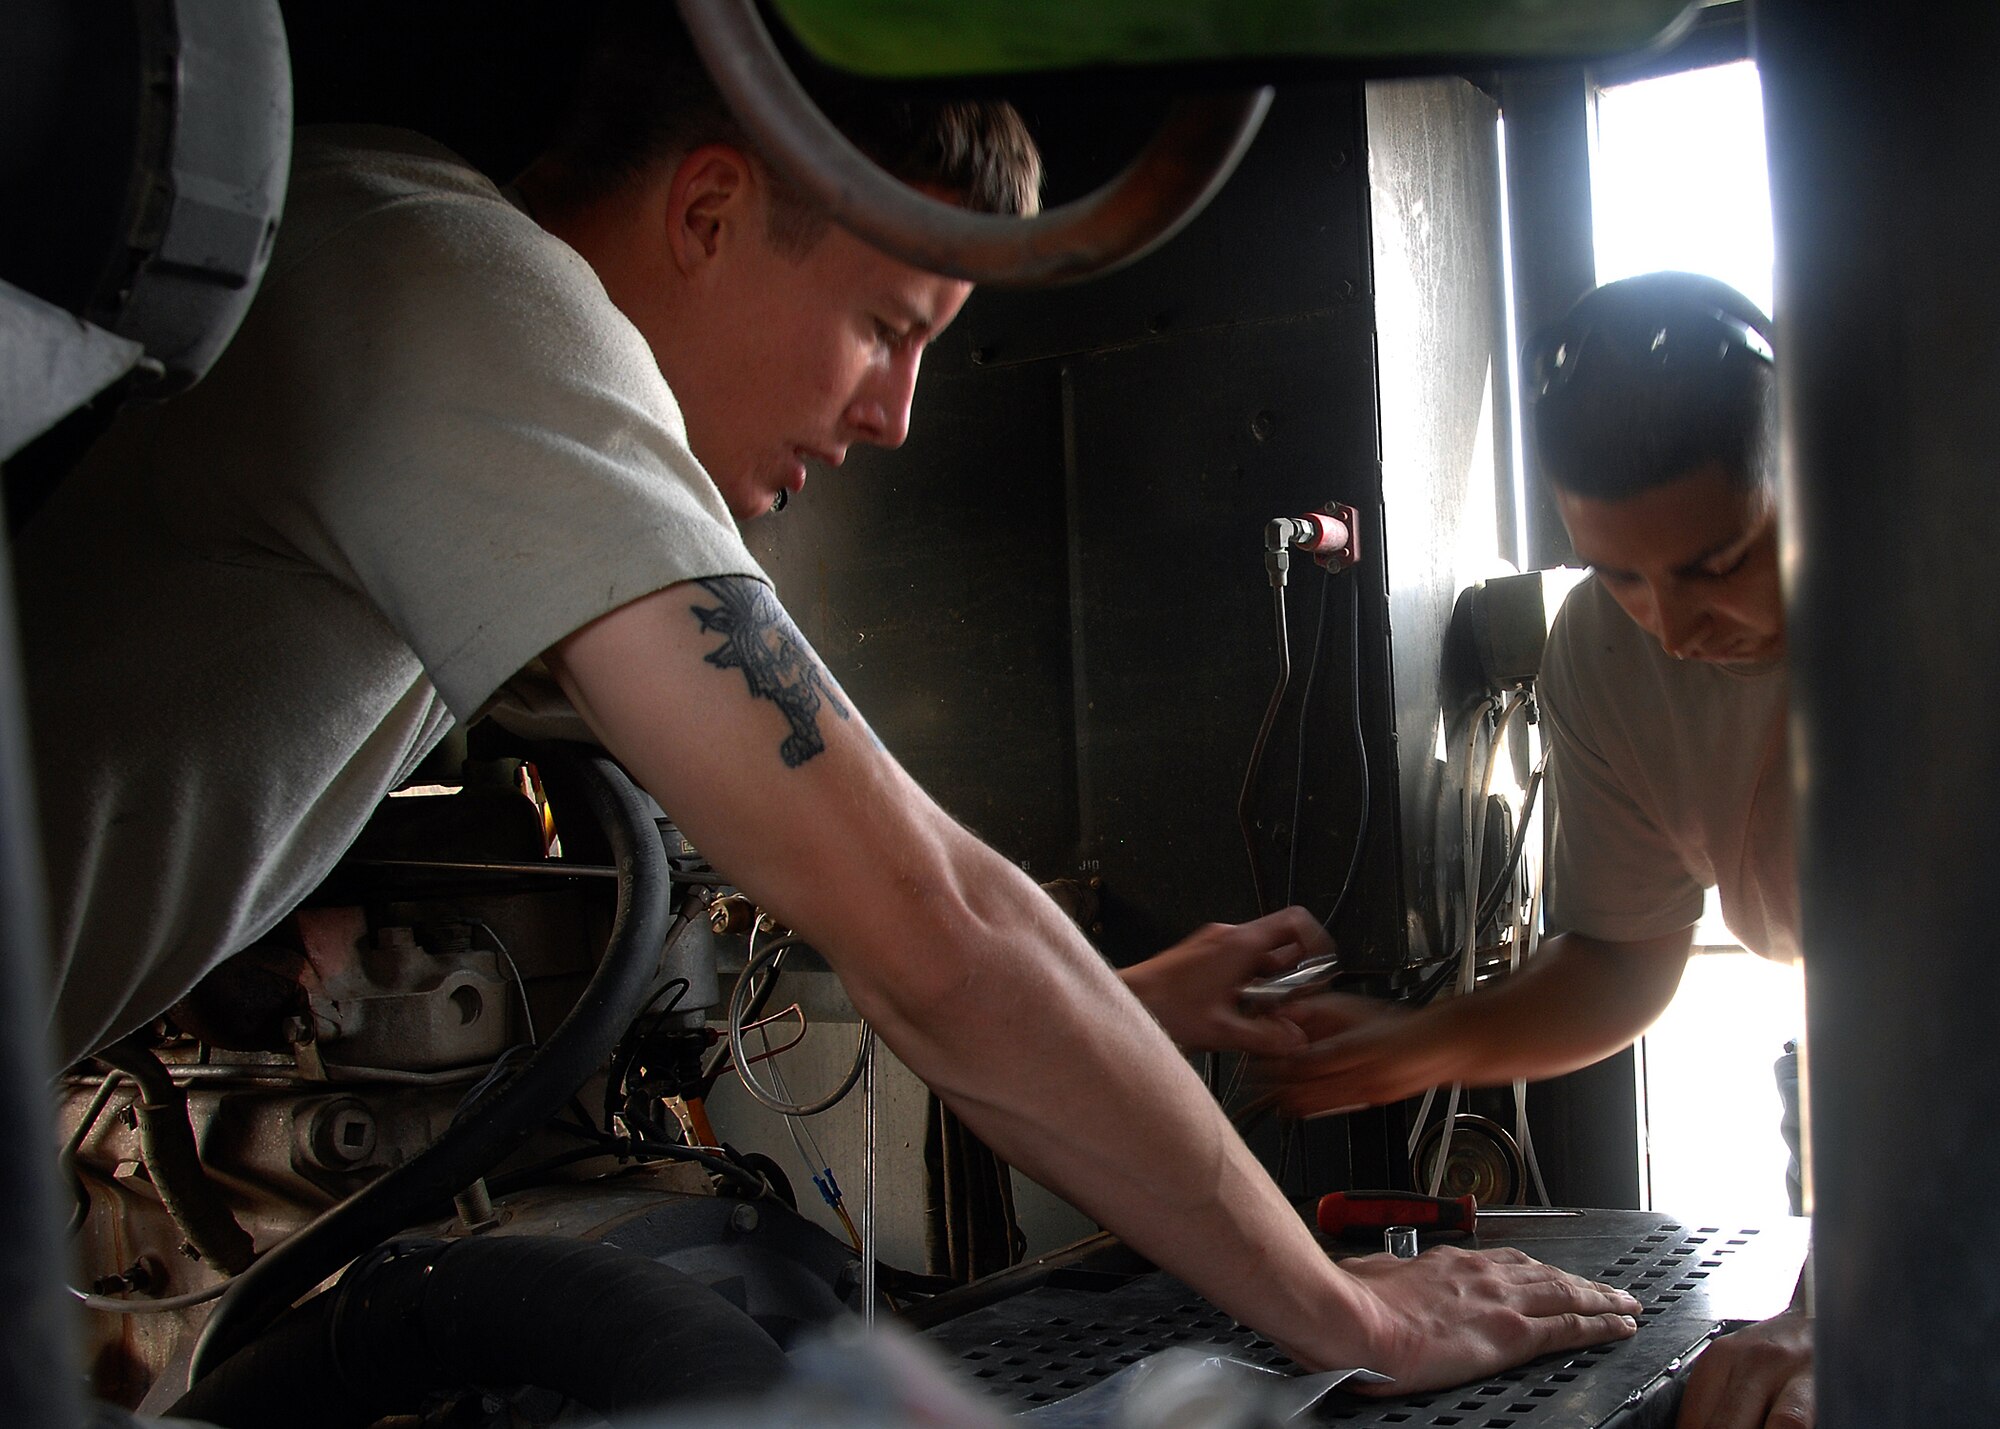 SOUTHWEST ASIA -- Staff Sgt. Jason Castillo, right, hands Senior Airman Carl Frame a socket wrench as they repair an MA-3D portable air conditioning system on Oct. 28 at an air base in Southwest Asia. Both Airmen are deployed to the 386th Expeditionary Maintenance Squadron Aerospace Ground Equipment flight. The AGE flight provides direct ground support for C-130 aircraft, C-17 aircraft and various transient airframes. They also perform scheduled inspections and countless unscheduled maintenance actions on their fleet of more than 200 powered and non-powered pieces of equipment. (U.S. Air Force photo/Tech. Sgt. Raheem Moore)